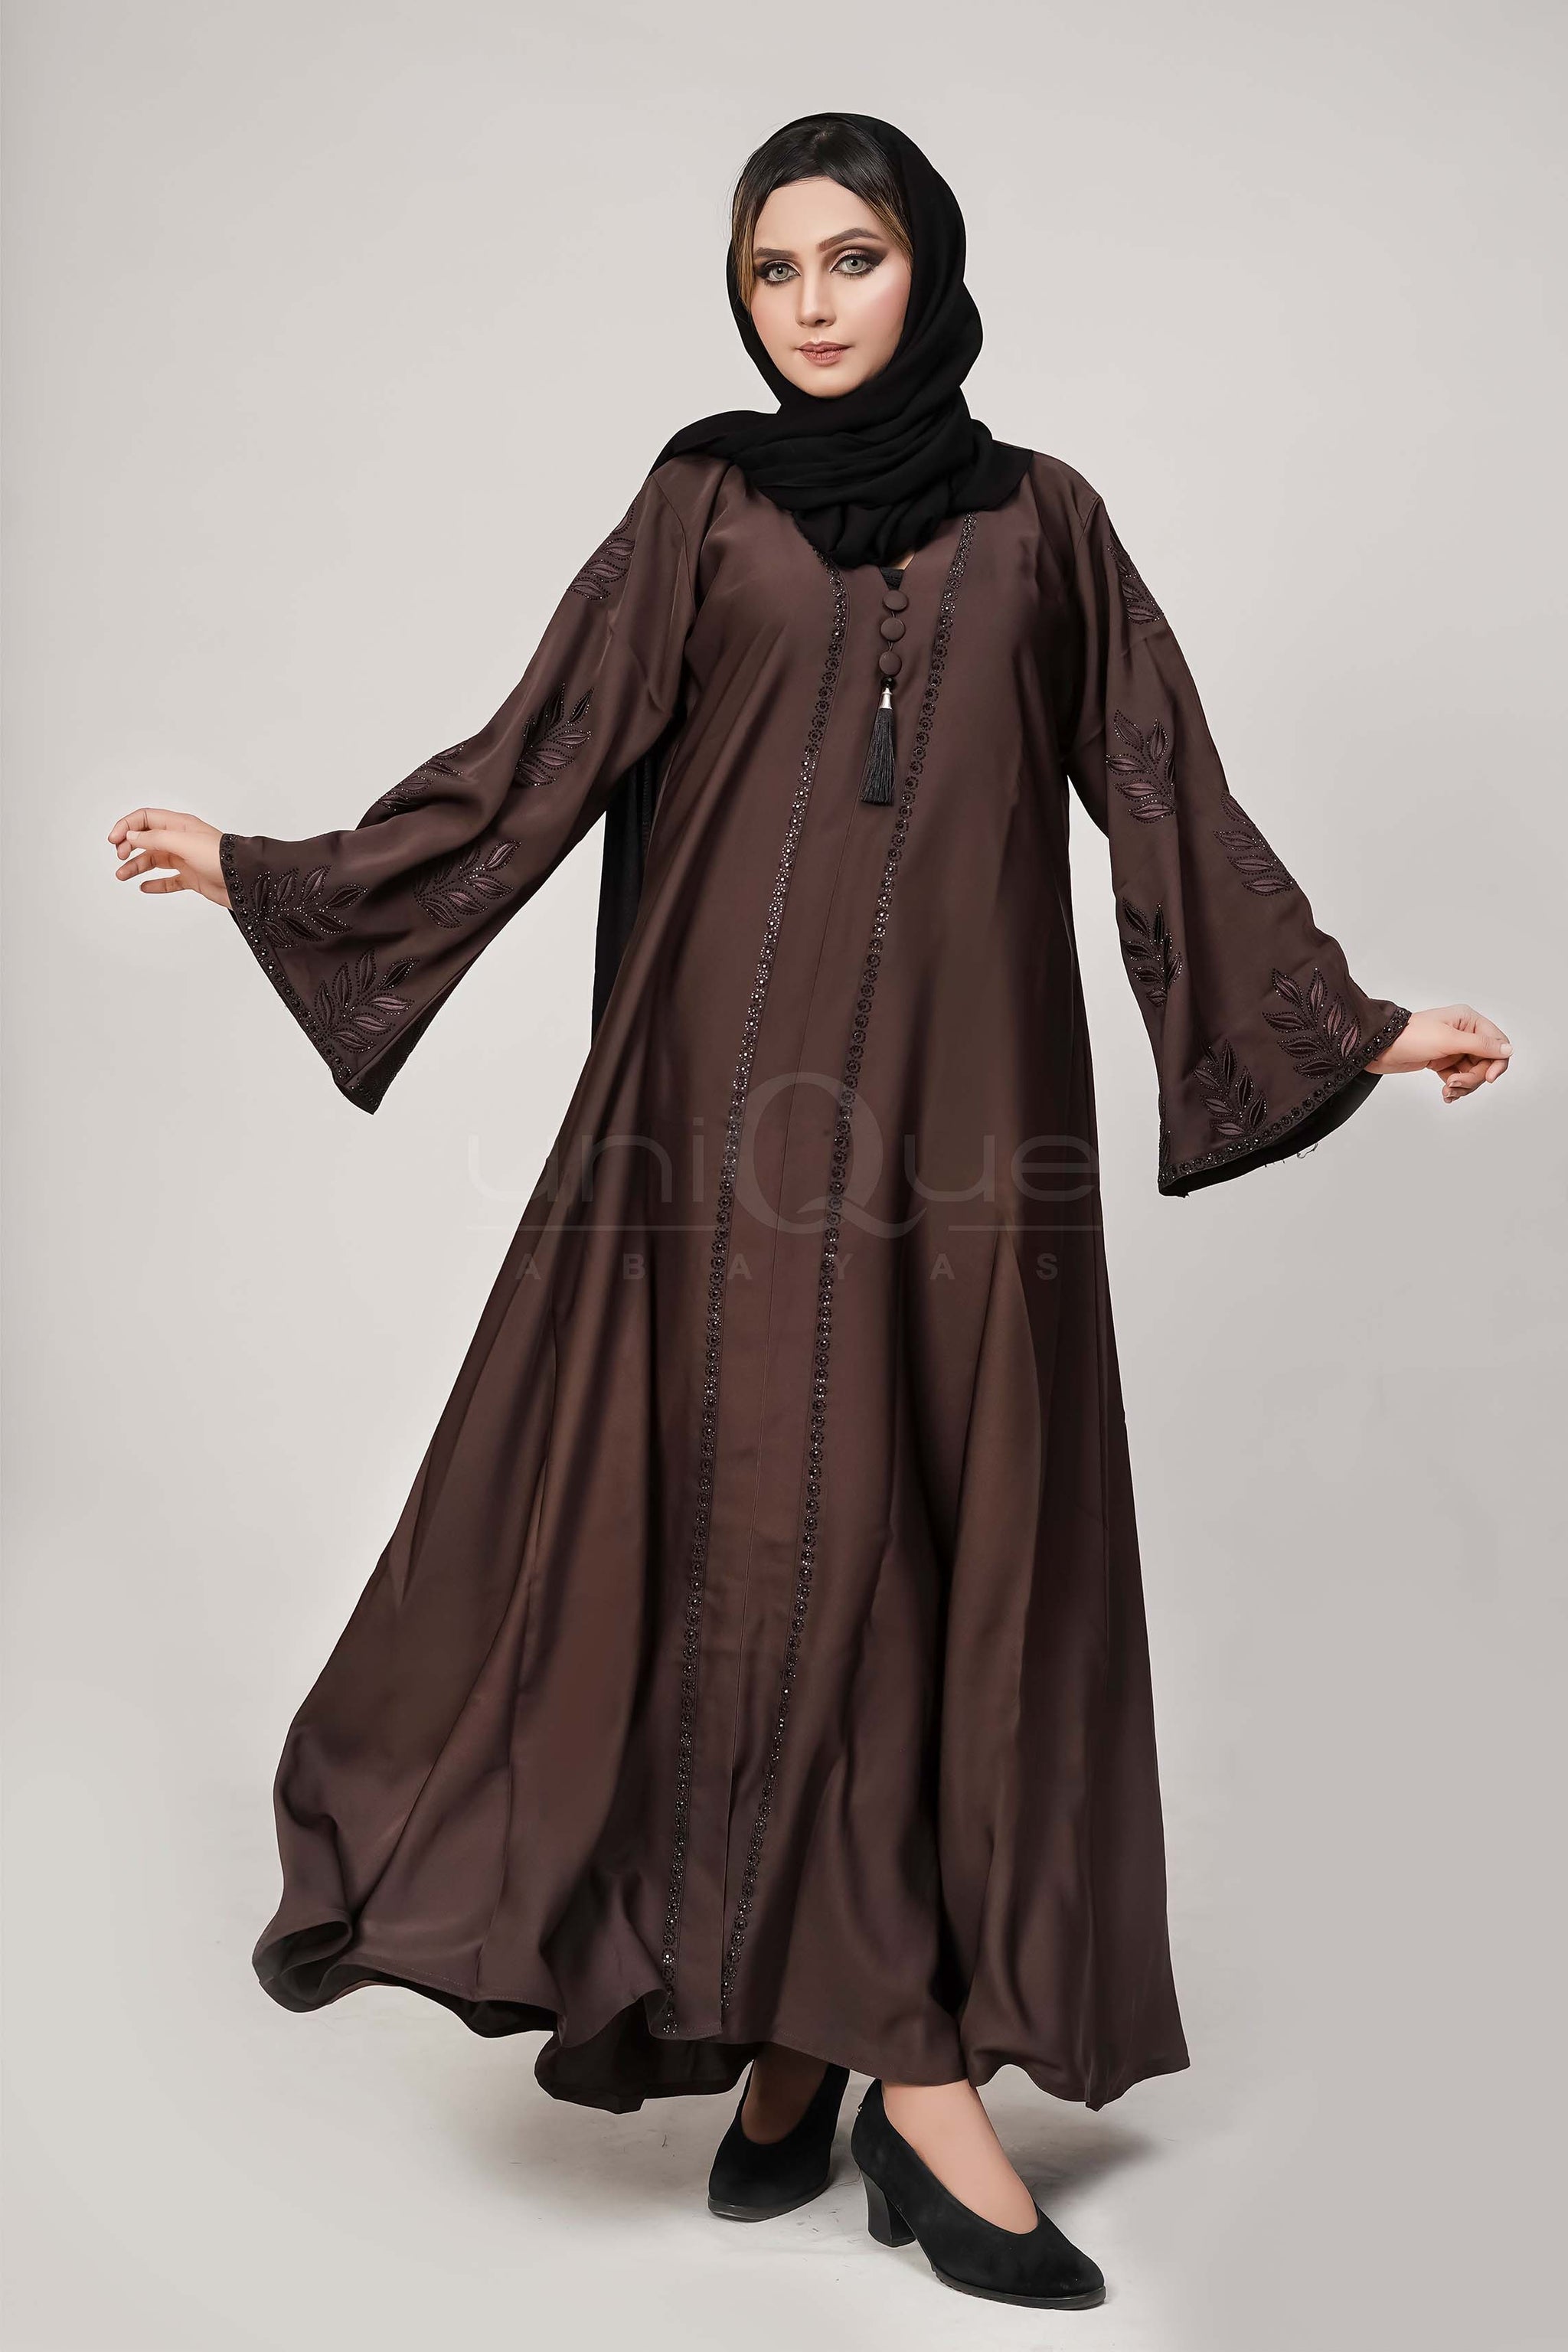 Embroidered Stone Chocolate Abaya by Uniquewallart Abaya for Women, Front Side Detailed View